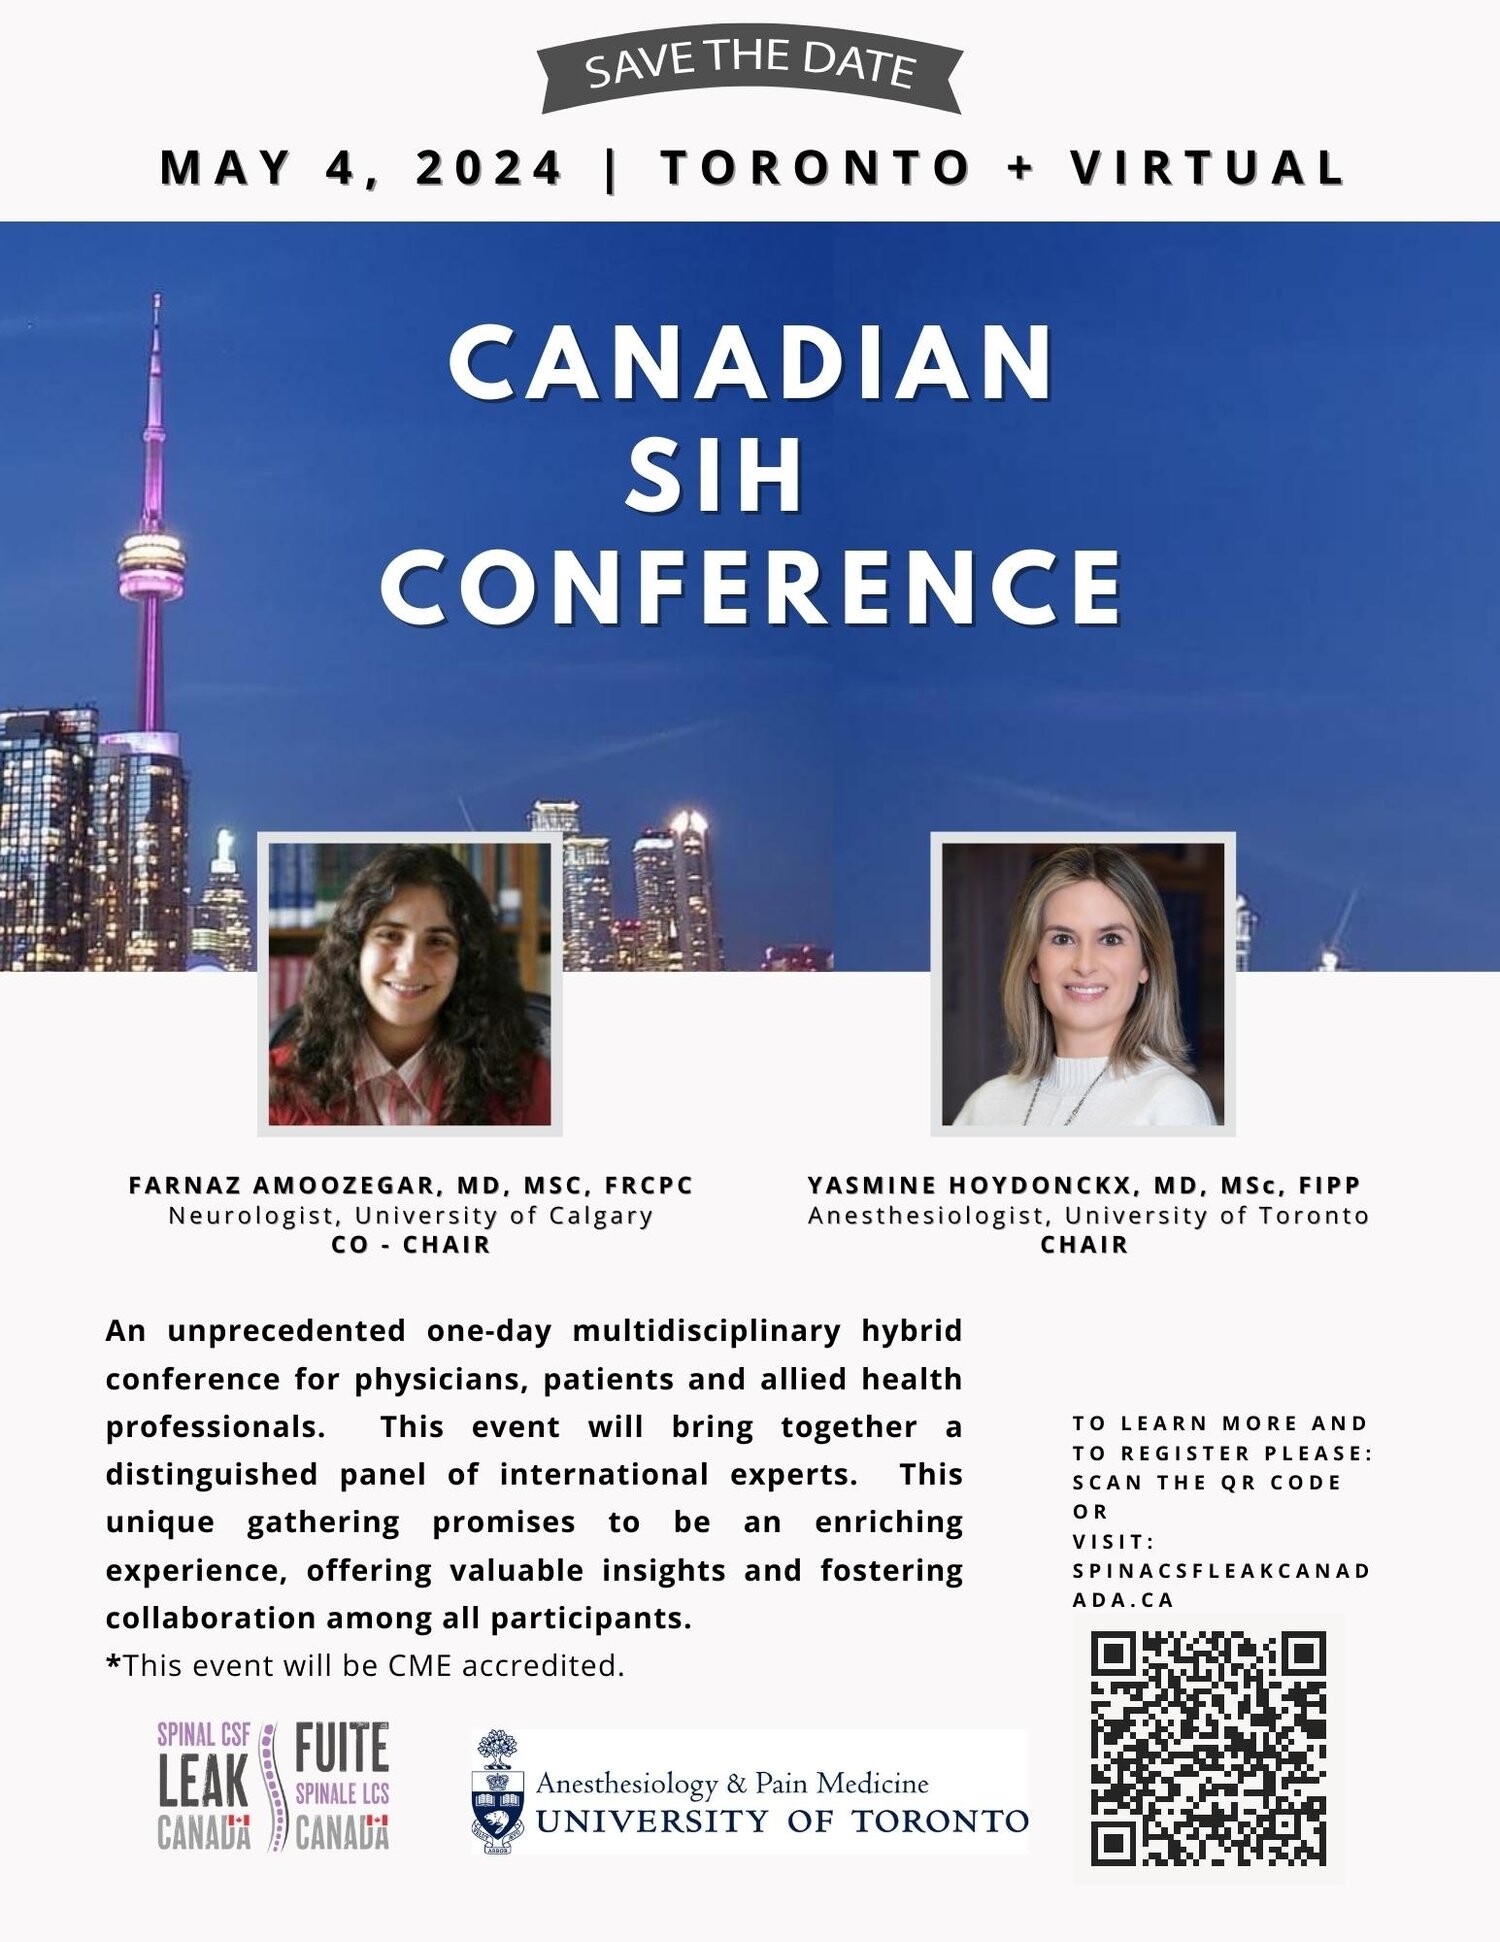 CANADIAN SIH CONFERENCE on May 4, 2024. Details in text body.